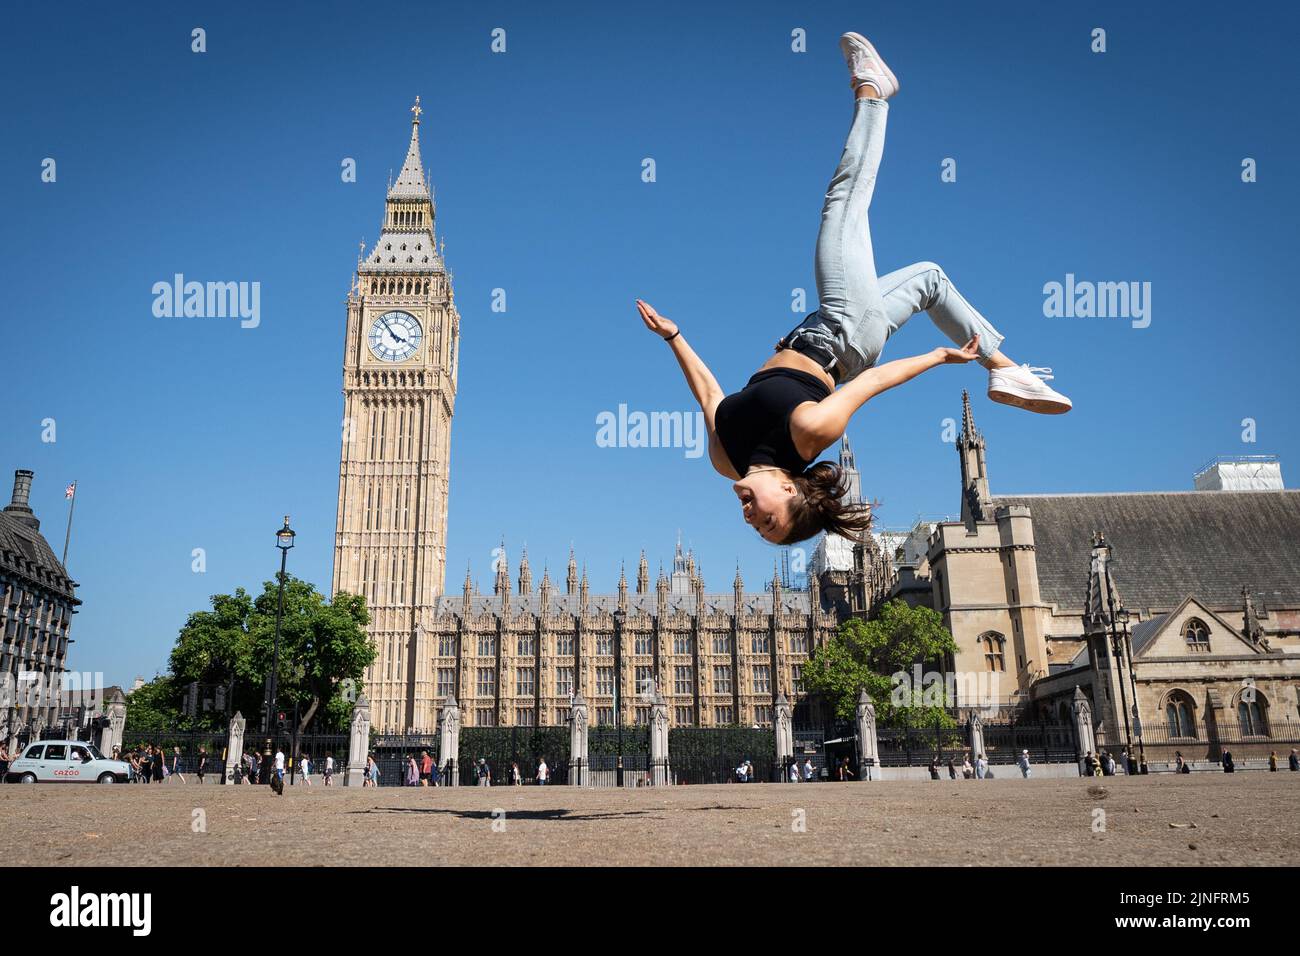 Trampolinist, Nicole Steiner from Switzerland practices some moves on a dried out Parliament Square in central London after competing in the Freestyle Trampoline World Championships in Hackney, east London. The Met Office has issued an amber heat warning running between Thursday and Sunday, which could see temperatures peak at 36C across southern England and eastern Wales, with some areas facing an 'exceptional' risk of wildfires as the Fire Severity Index is raised to its highest level. Picture date: Thursday August 11, 2022. Stock Photo